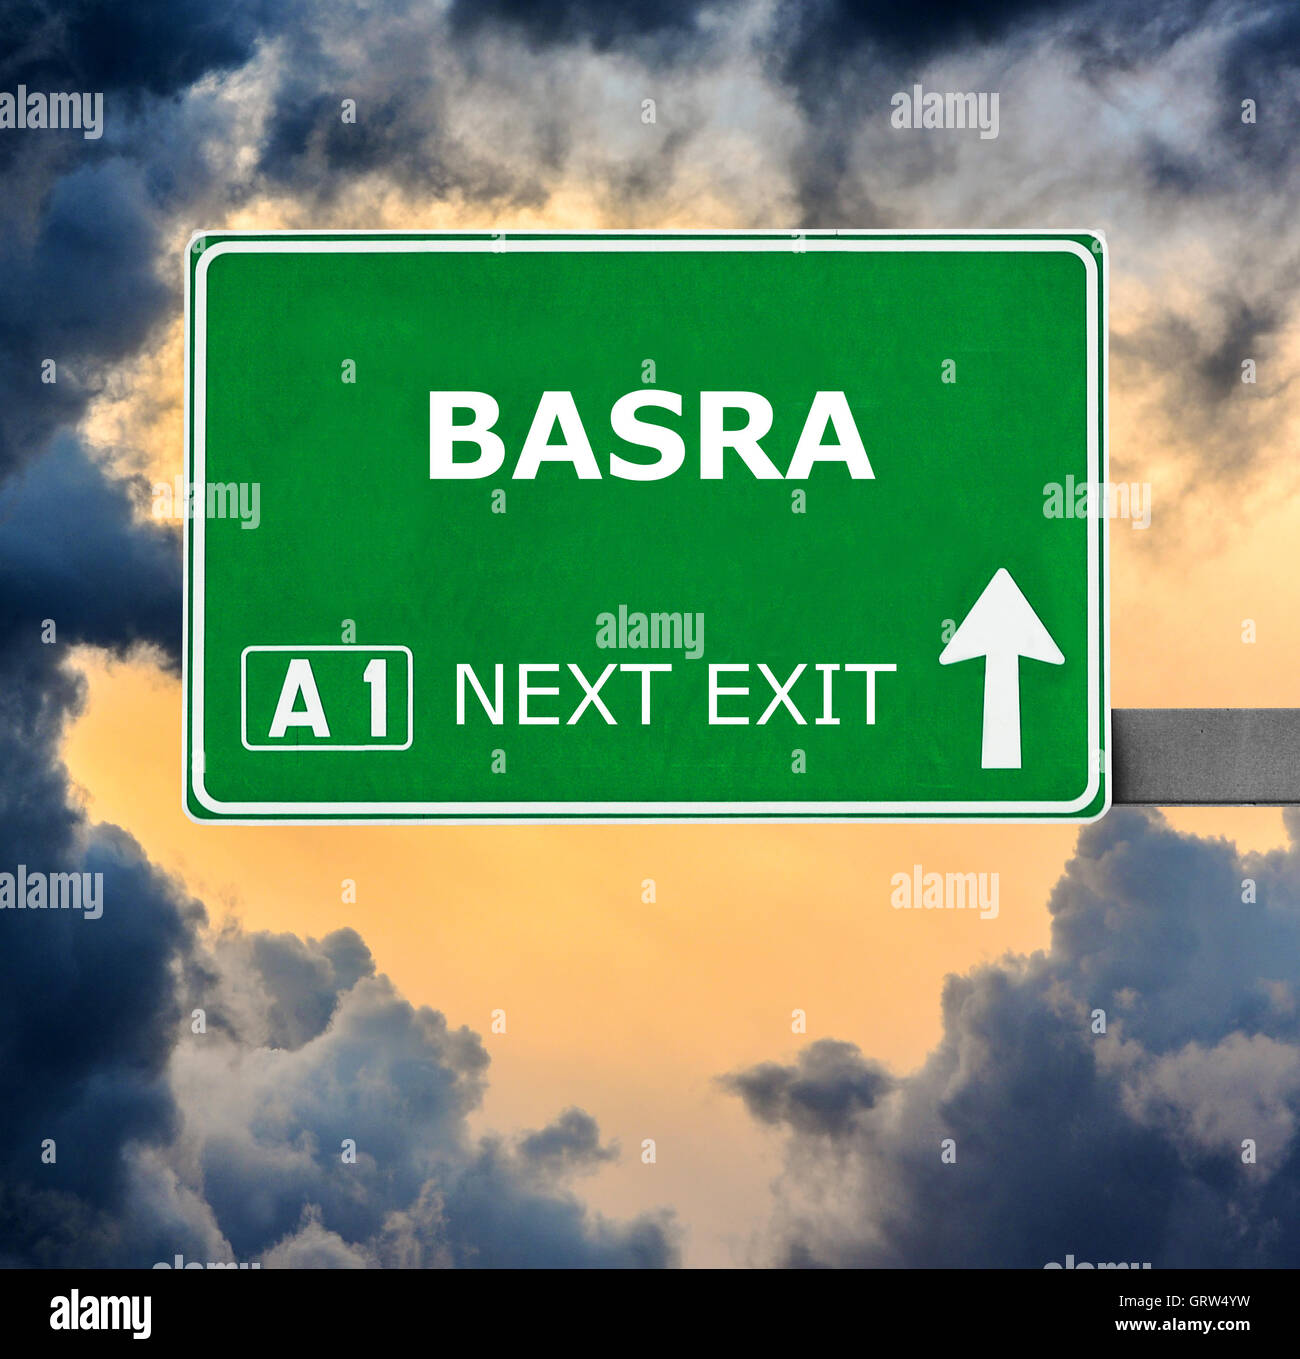 BASRA road sign against clear blue sky Stock Photo